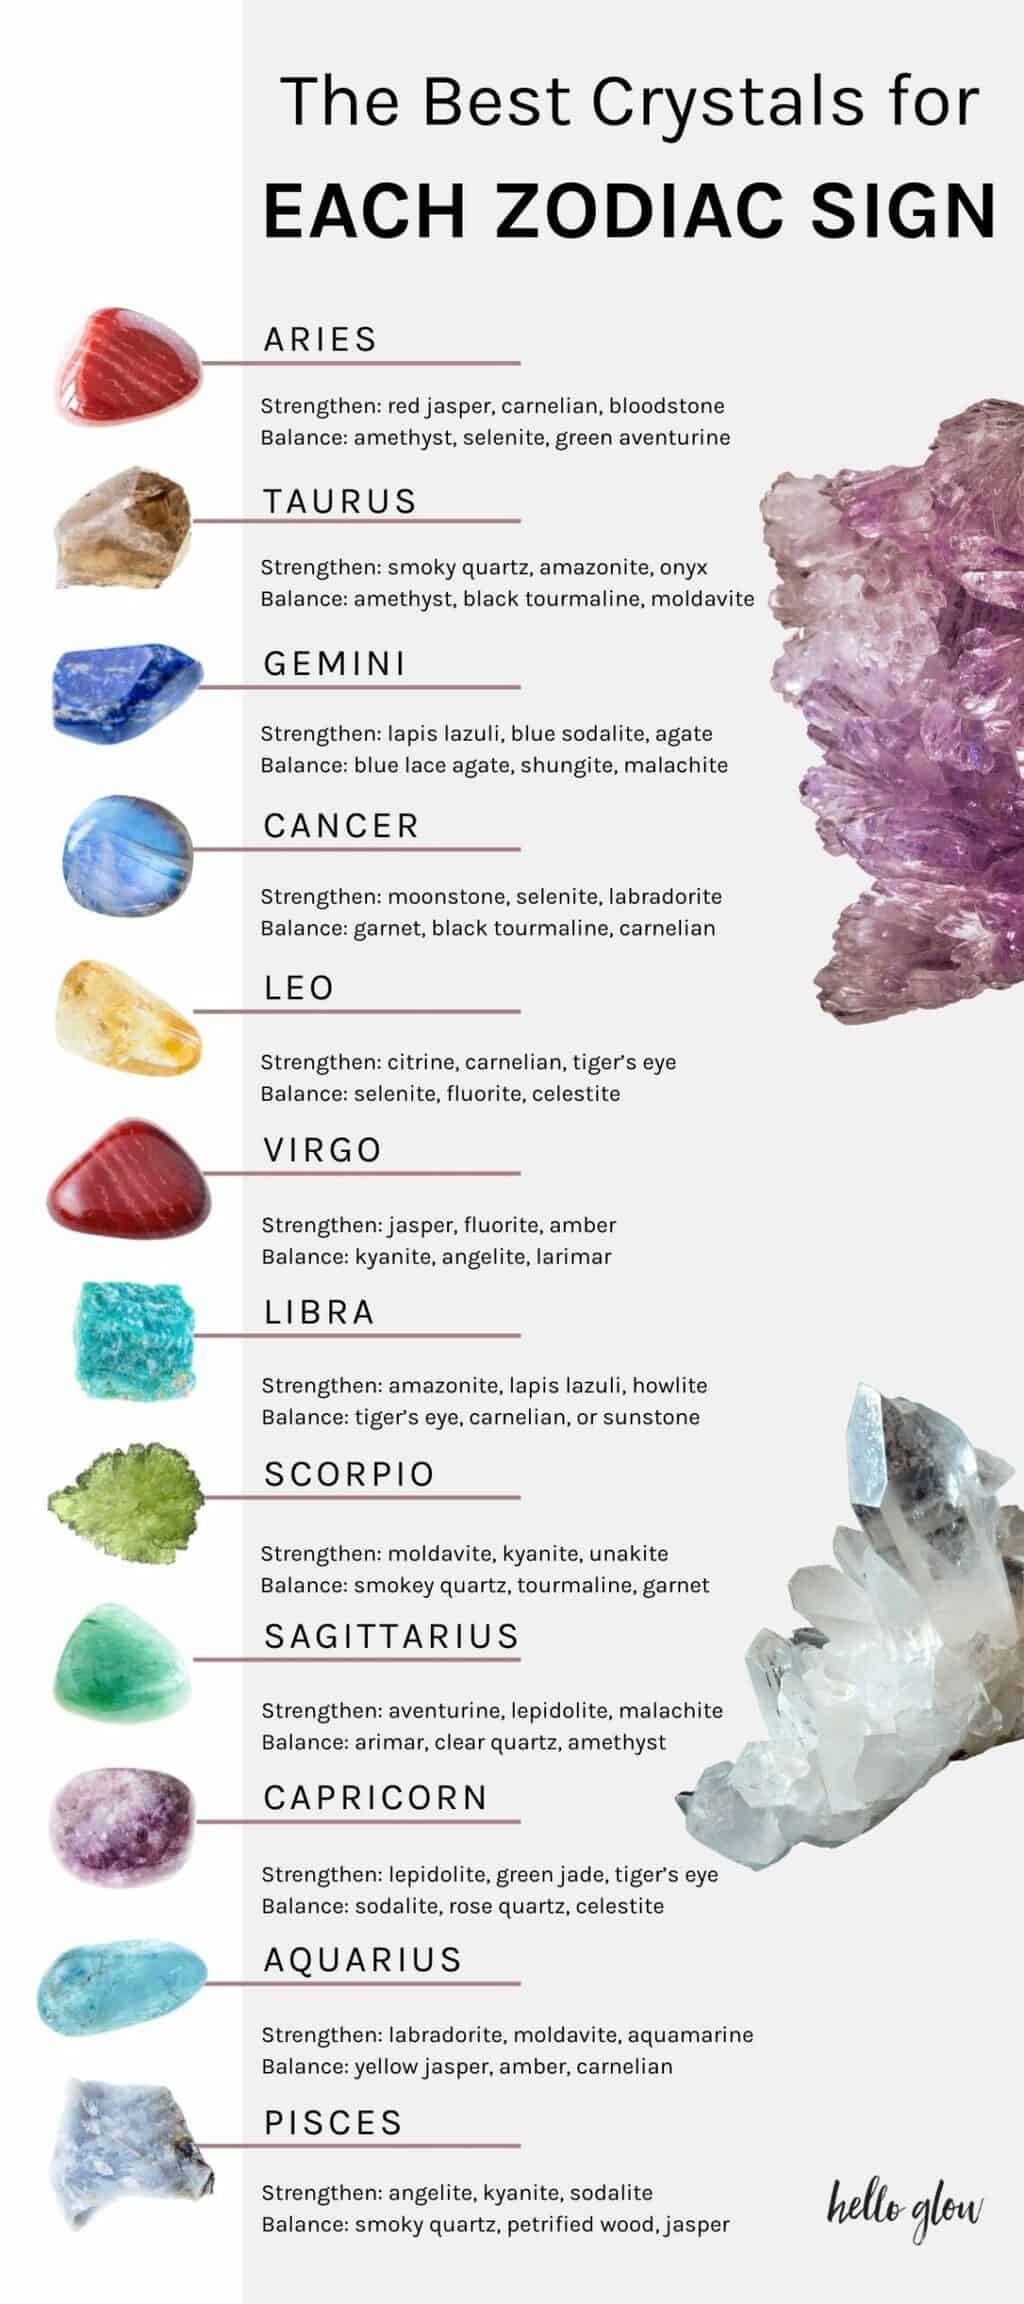 The Best Crystals for Each Zodiac Sign